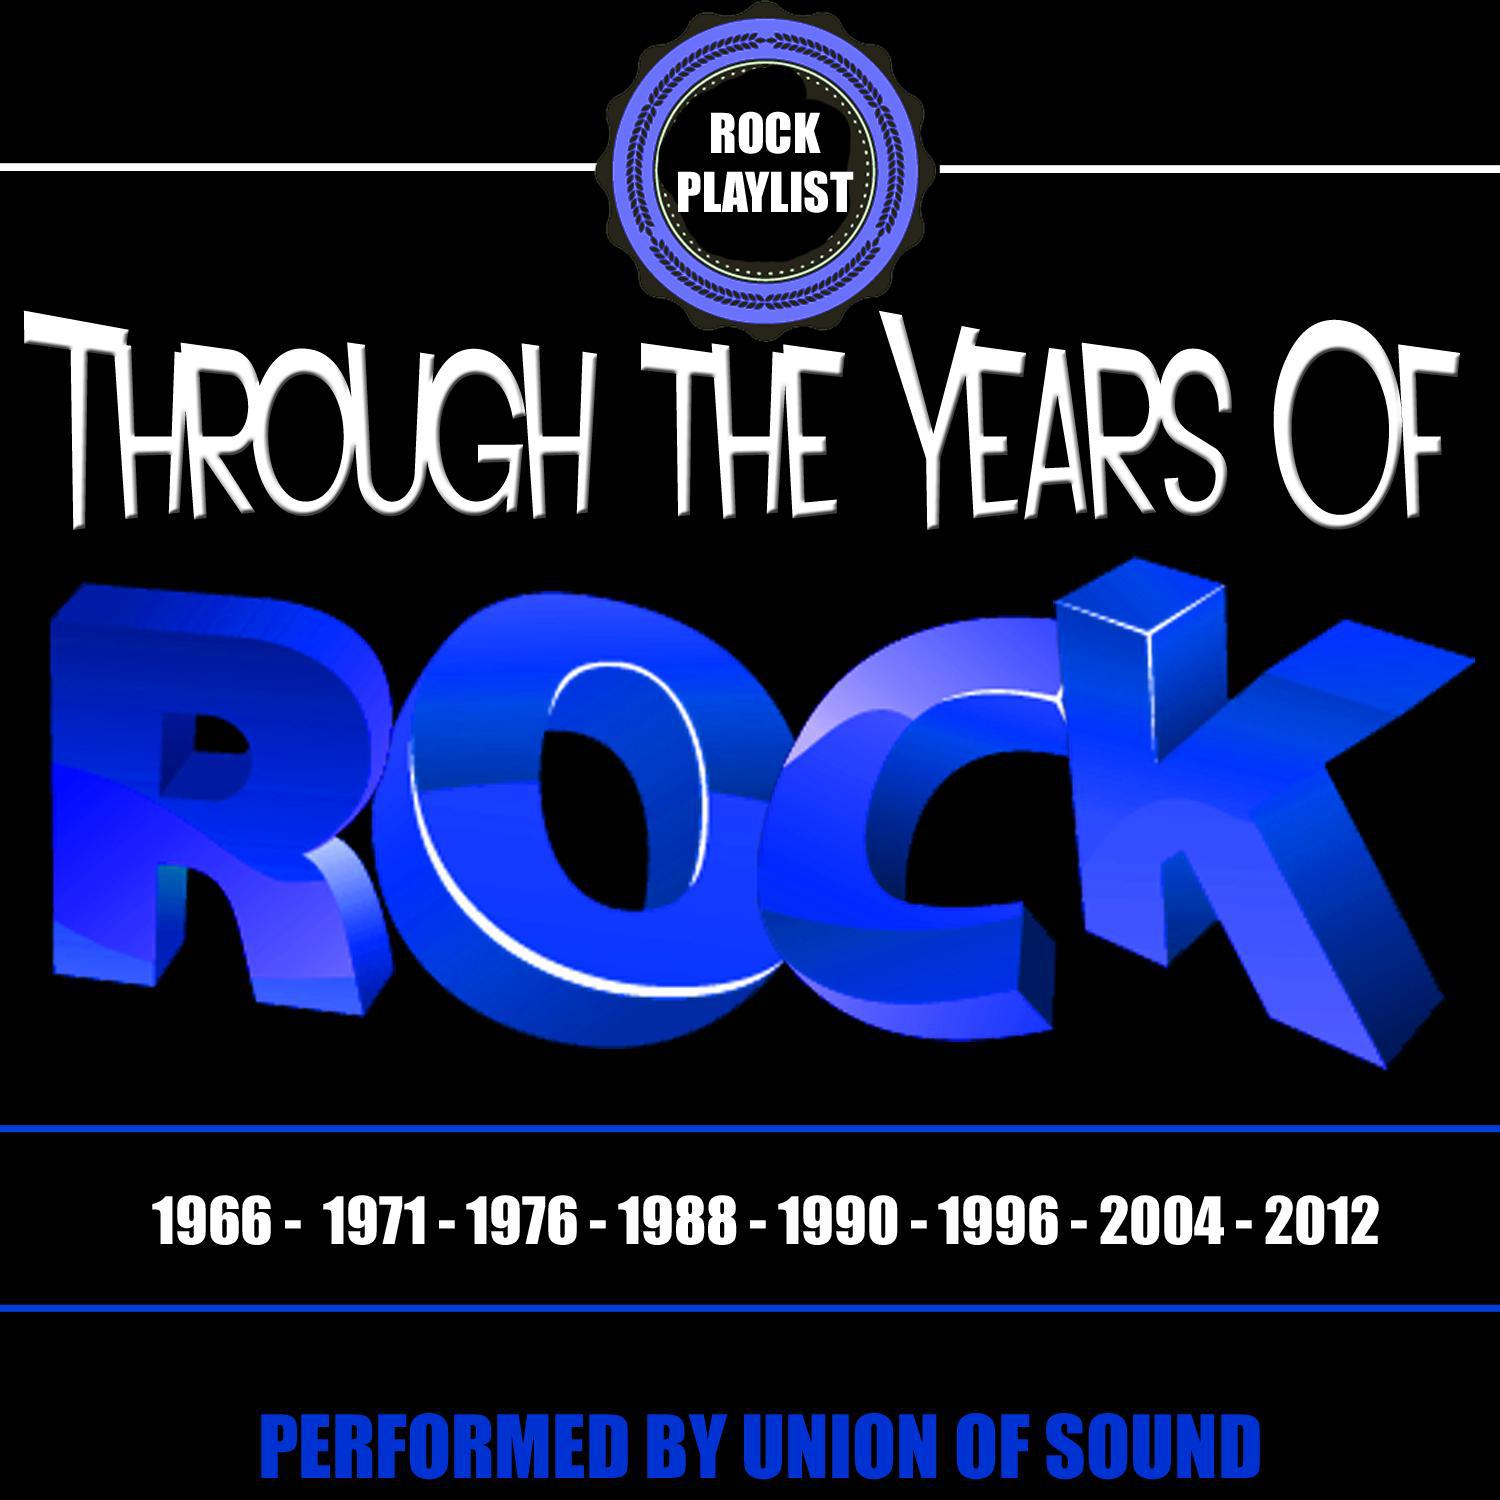 Through the Years of Rock